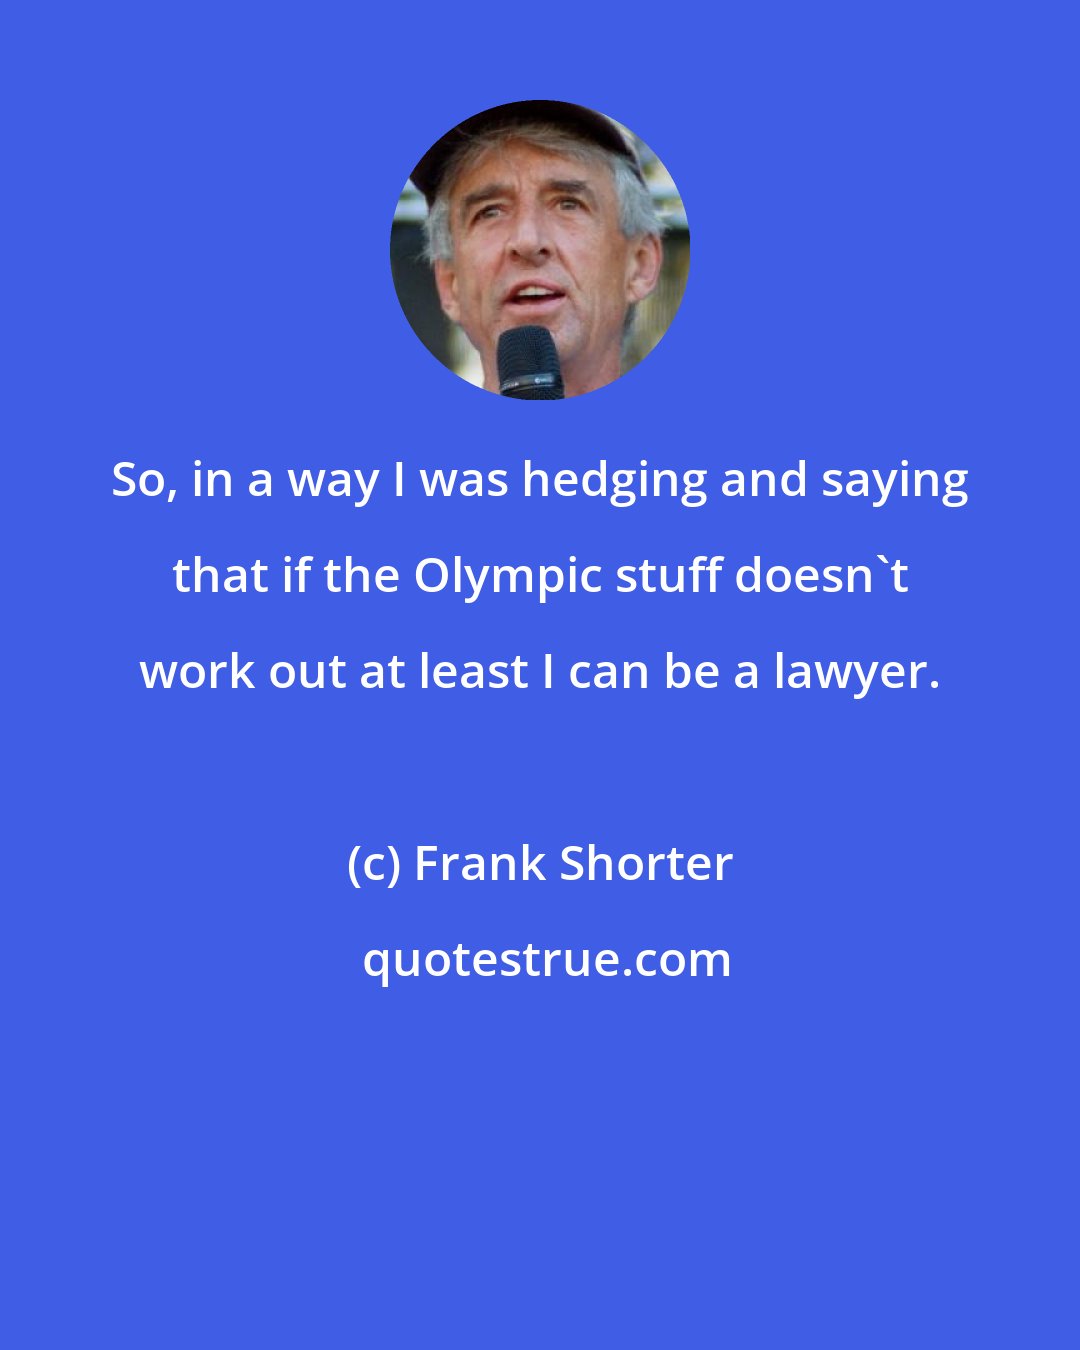 Frank Shorter: So, in a way I was hedging and saying that if the Olympic stuff doesn't work out at least I can be a lawyer.